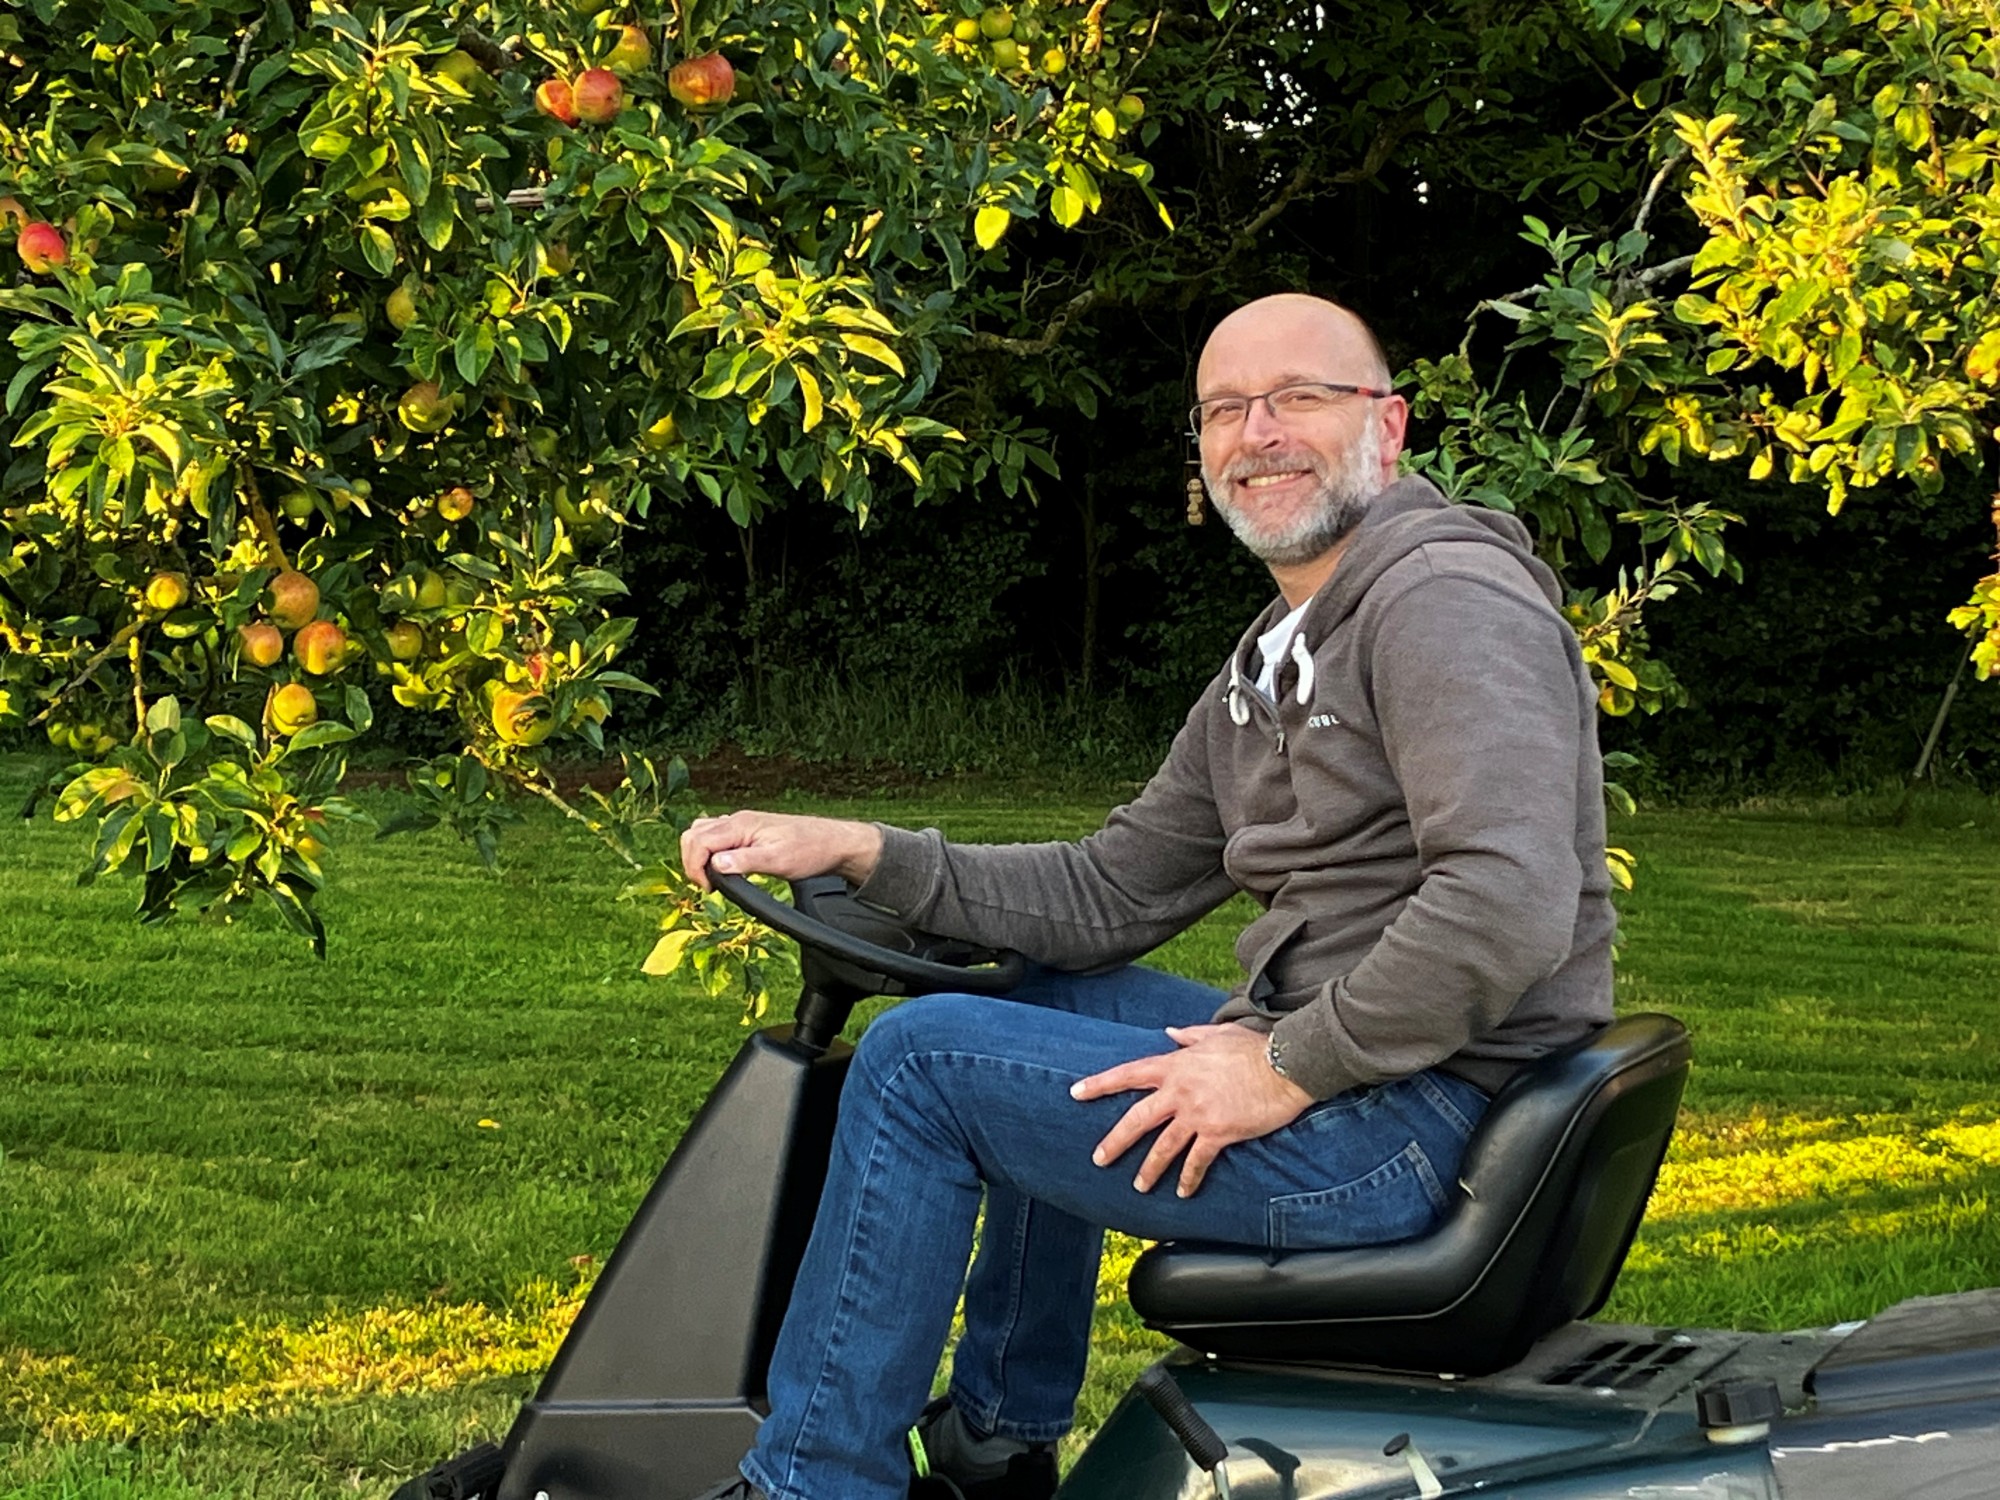 Graeme is pictured on a lawn mower with an orchard behind him.